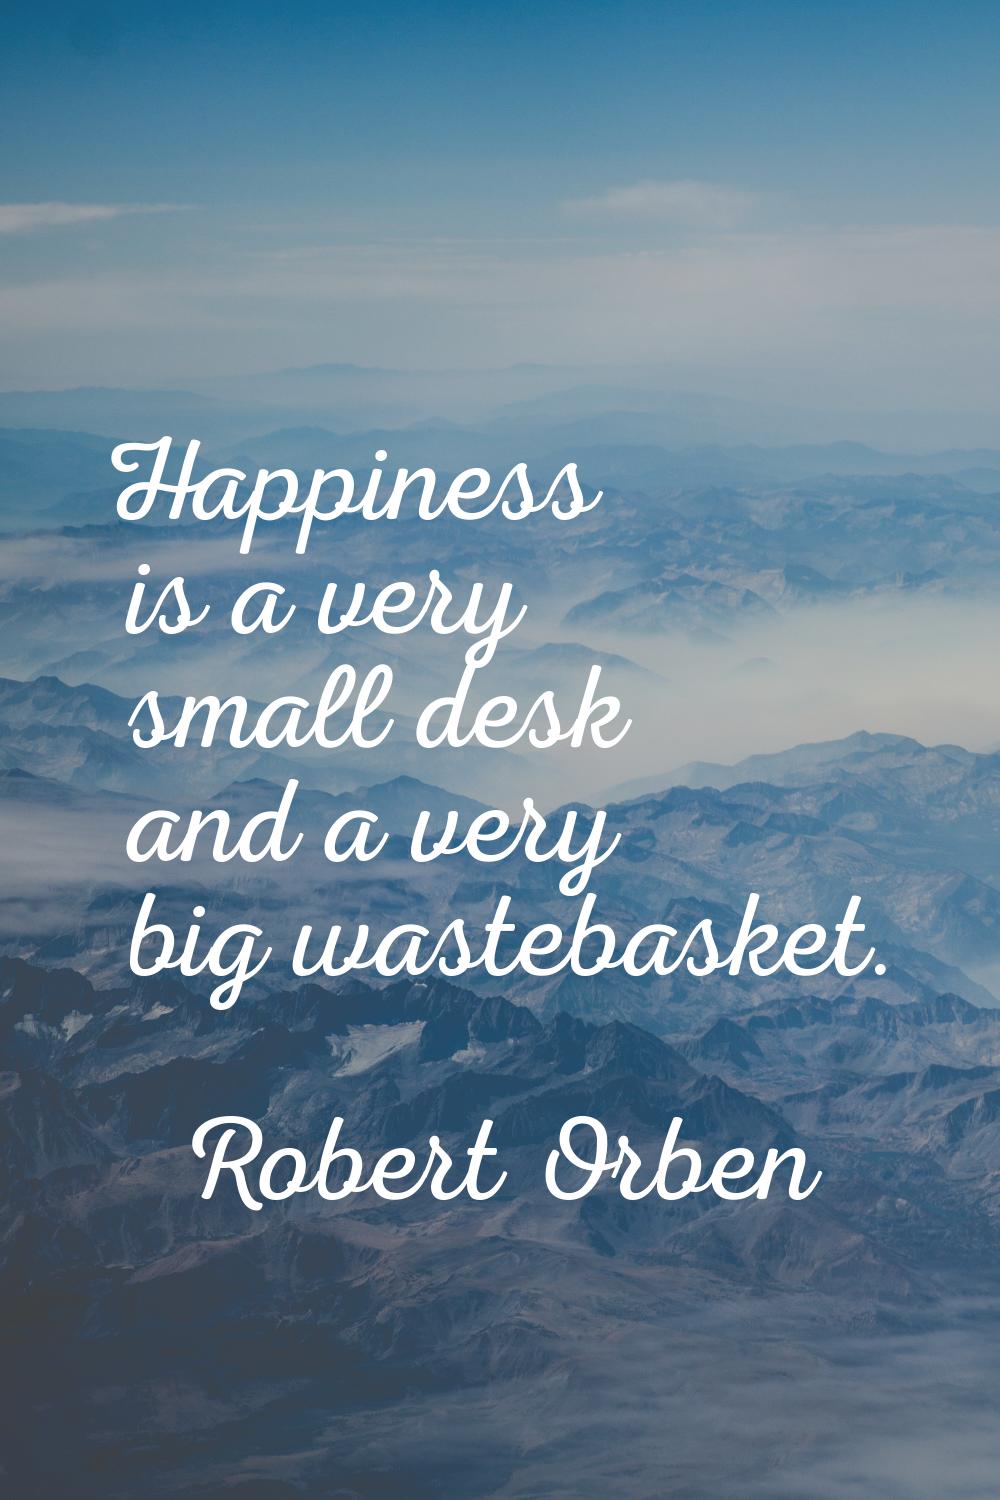 Happiness is a very small desk and a very big wastebasket.